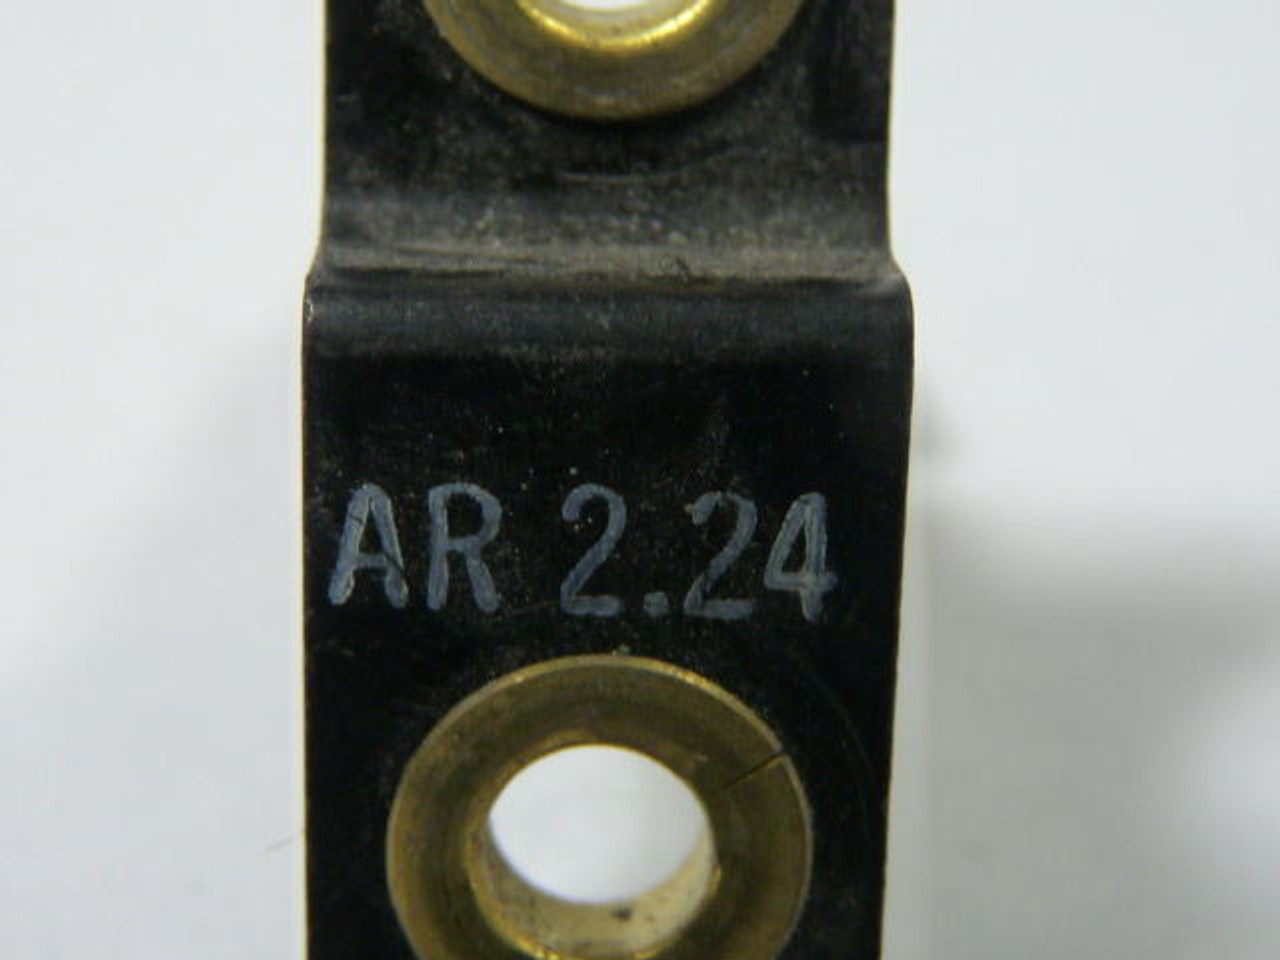 Square D AR2.24 Overload Relay Thermal Unit USED